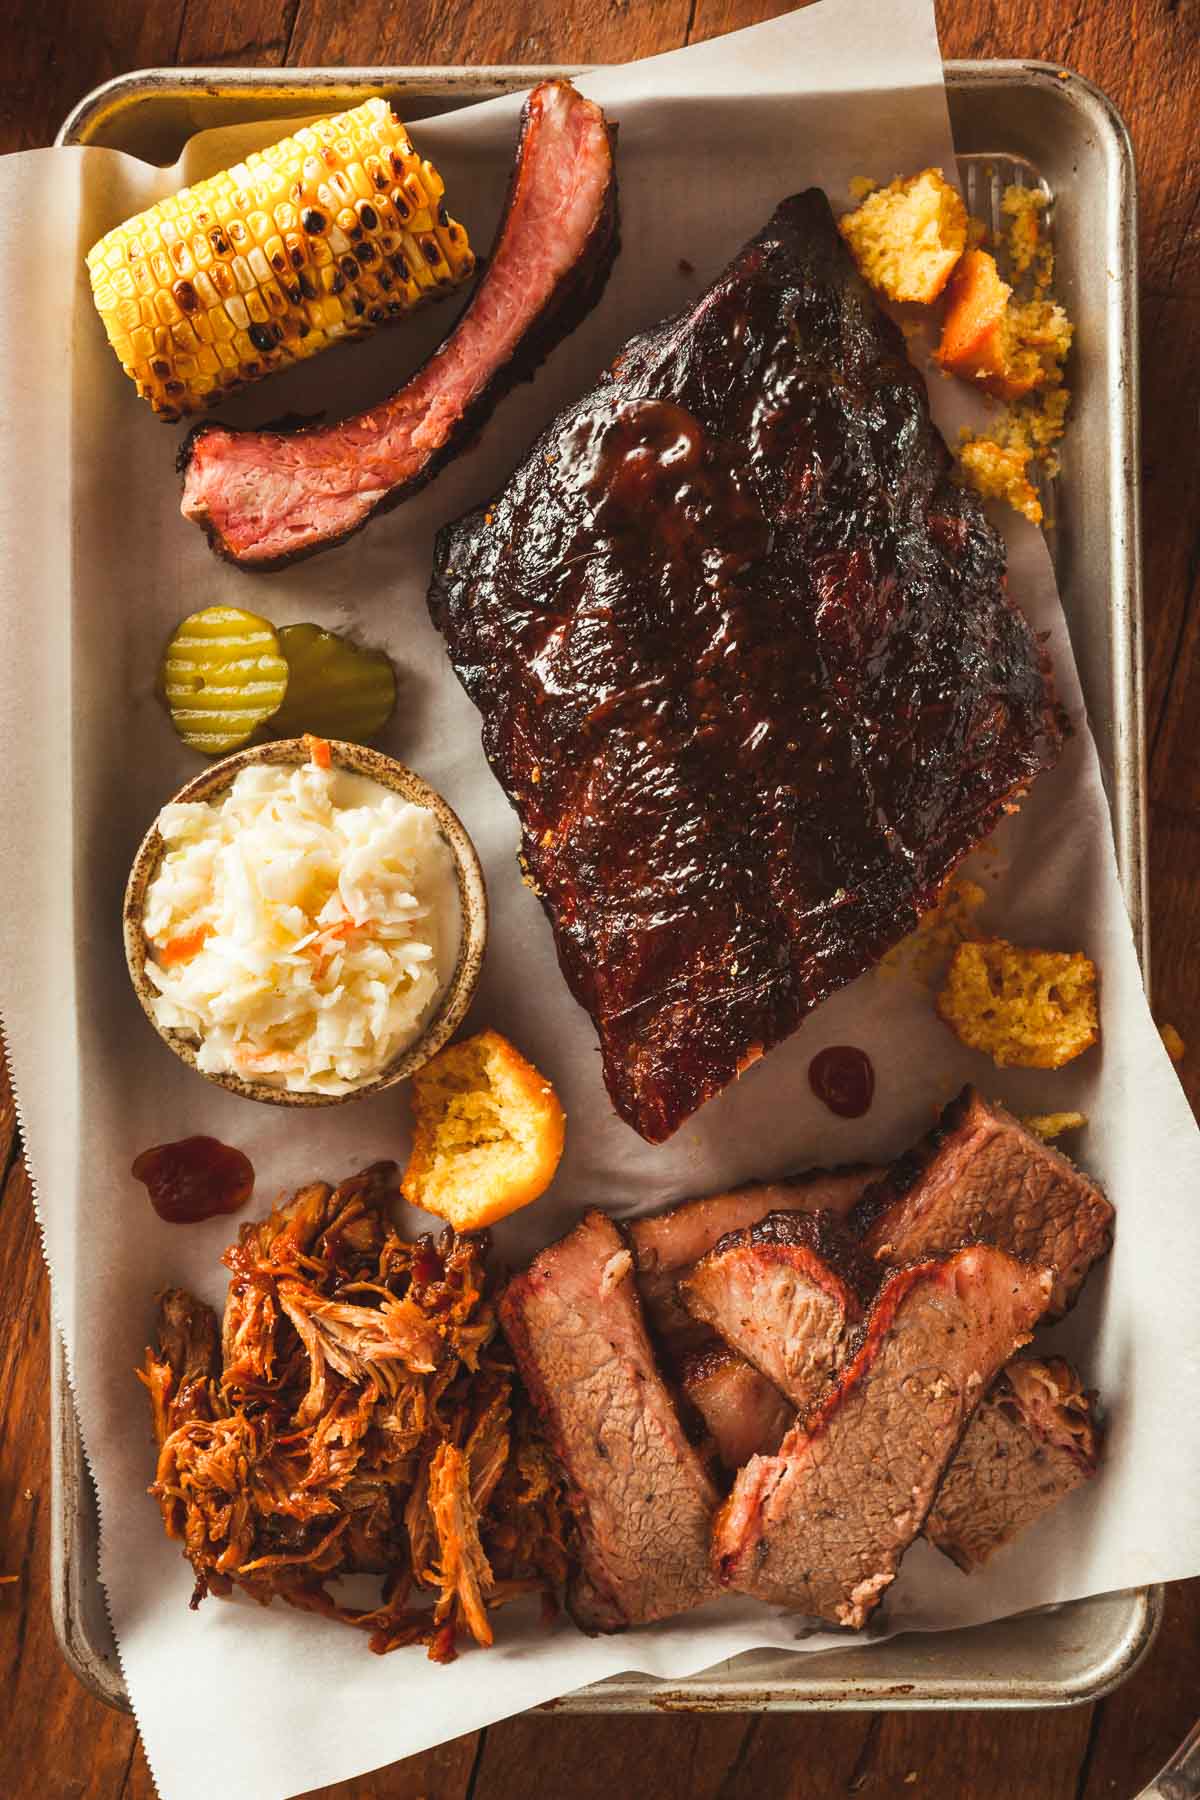 A BBQ meat platter perfect for one adult: half a rack of ribs next to a small serving of pulled pork, brisket, and traditional sides like coleslaw and pickles.